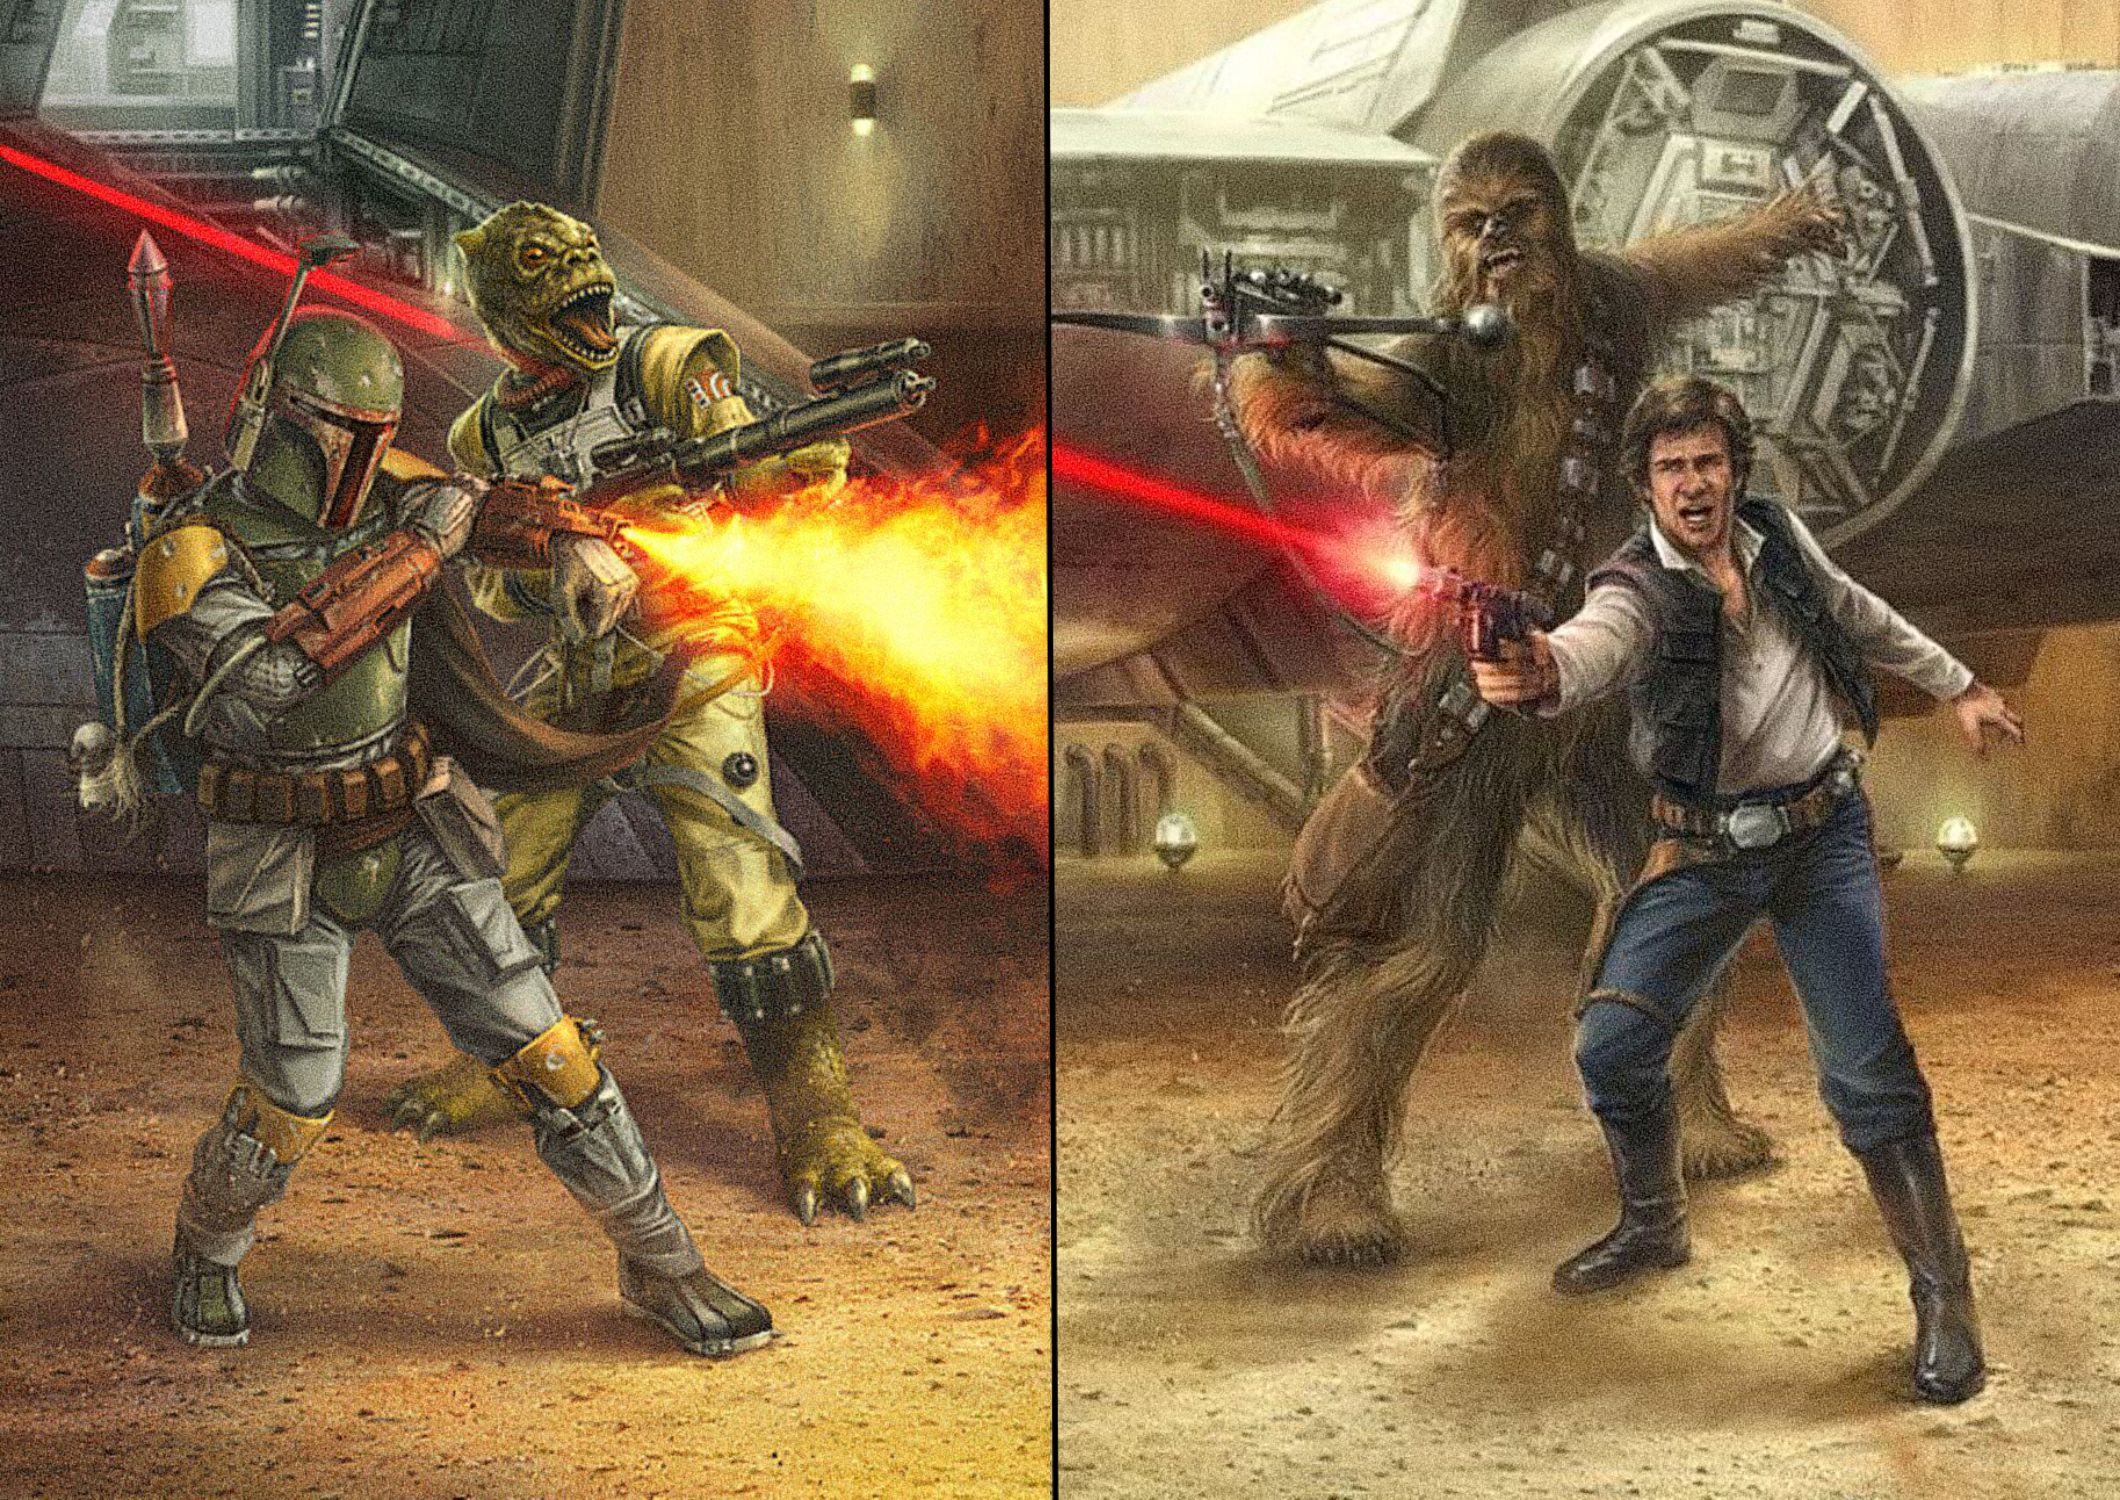 Boba Fett and Bossk versus Han Solo and Chewbacca